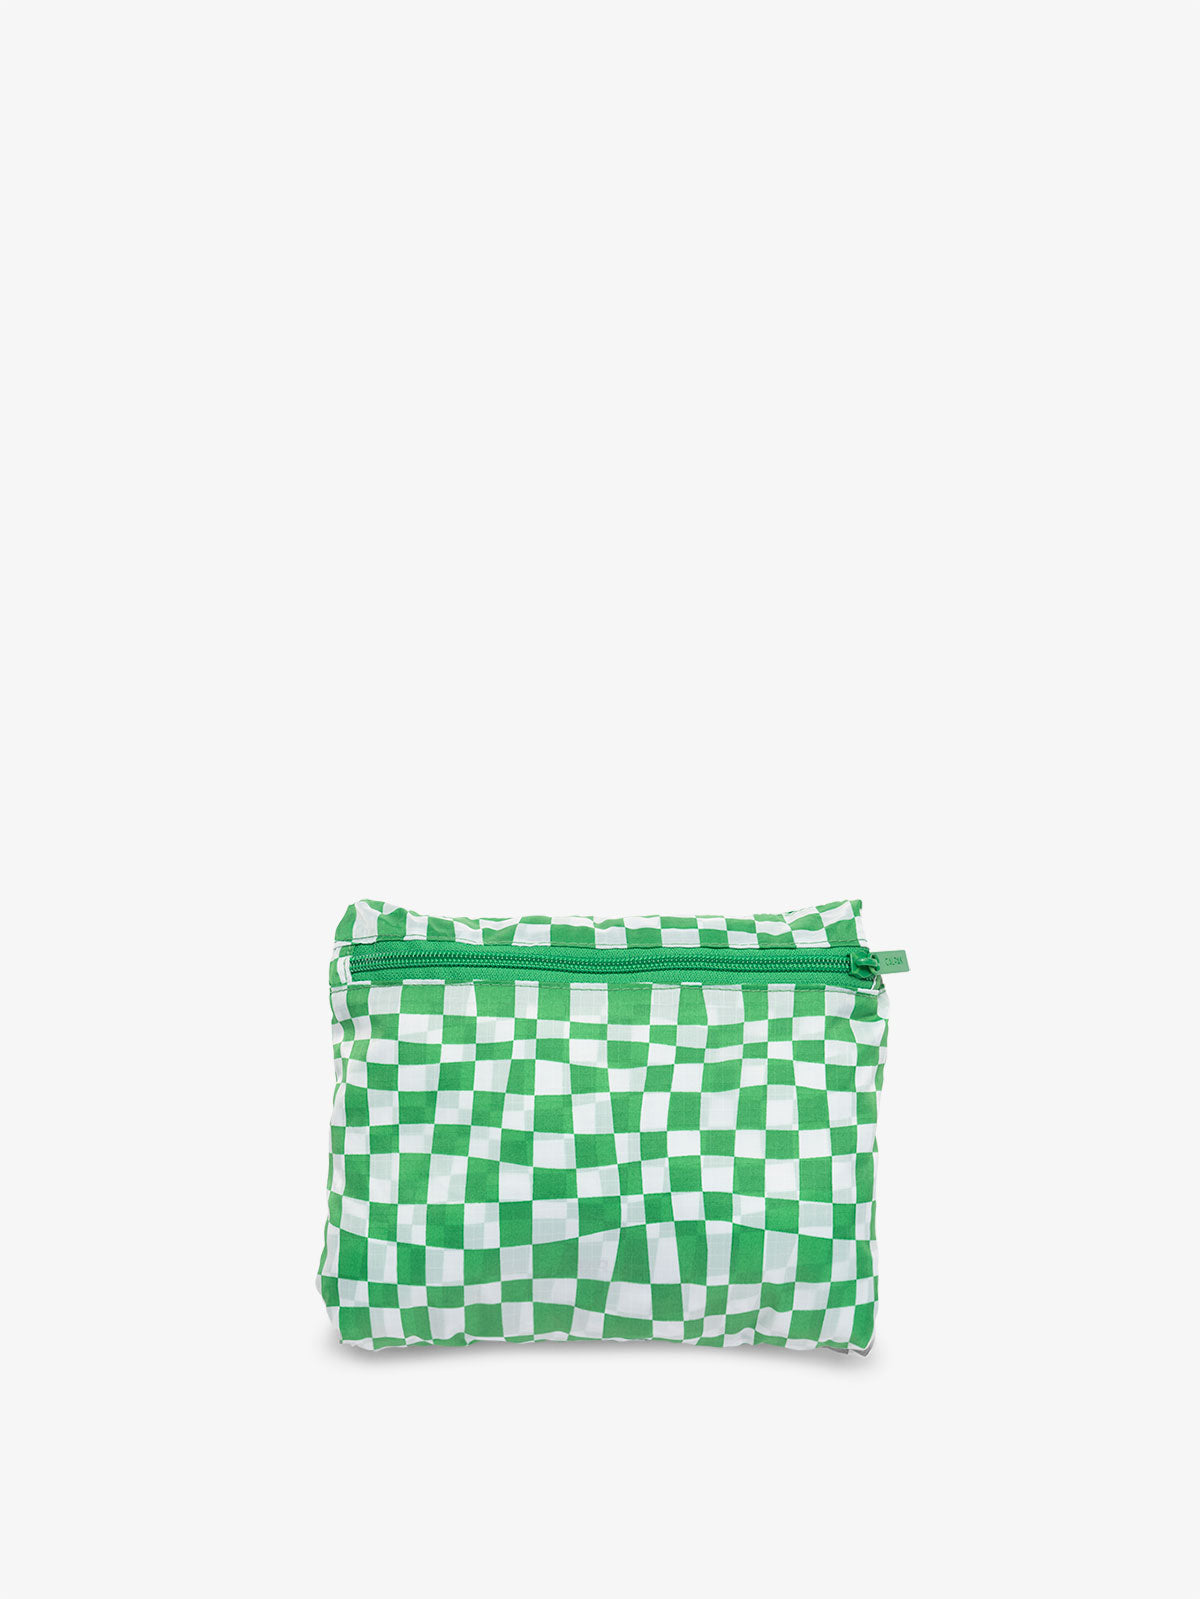 CALPAK Compakt foldable duffle bag for travel in green checkerboard